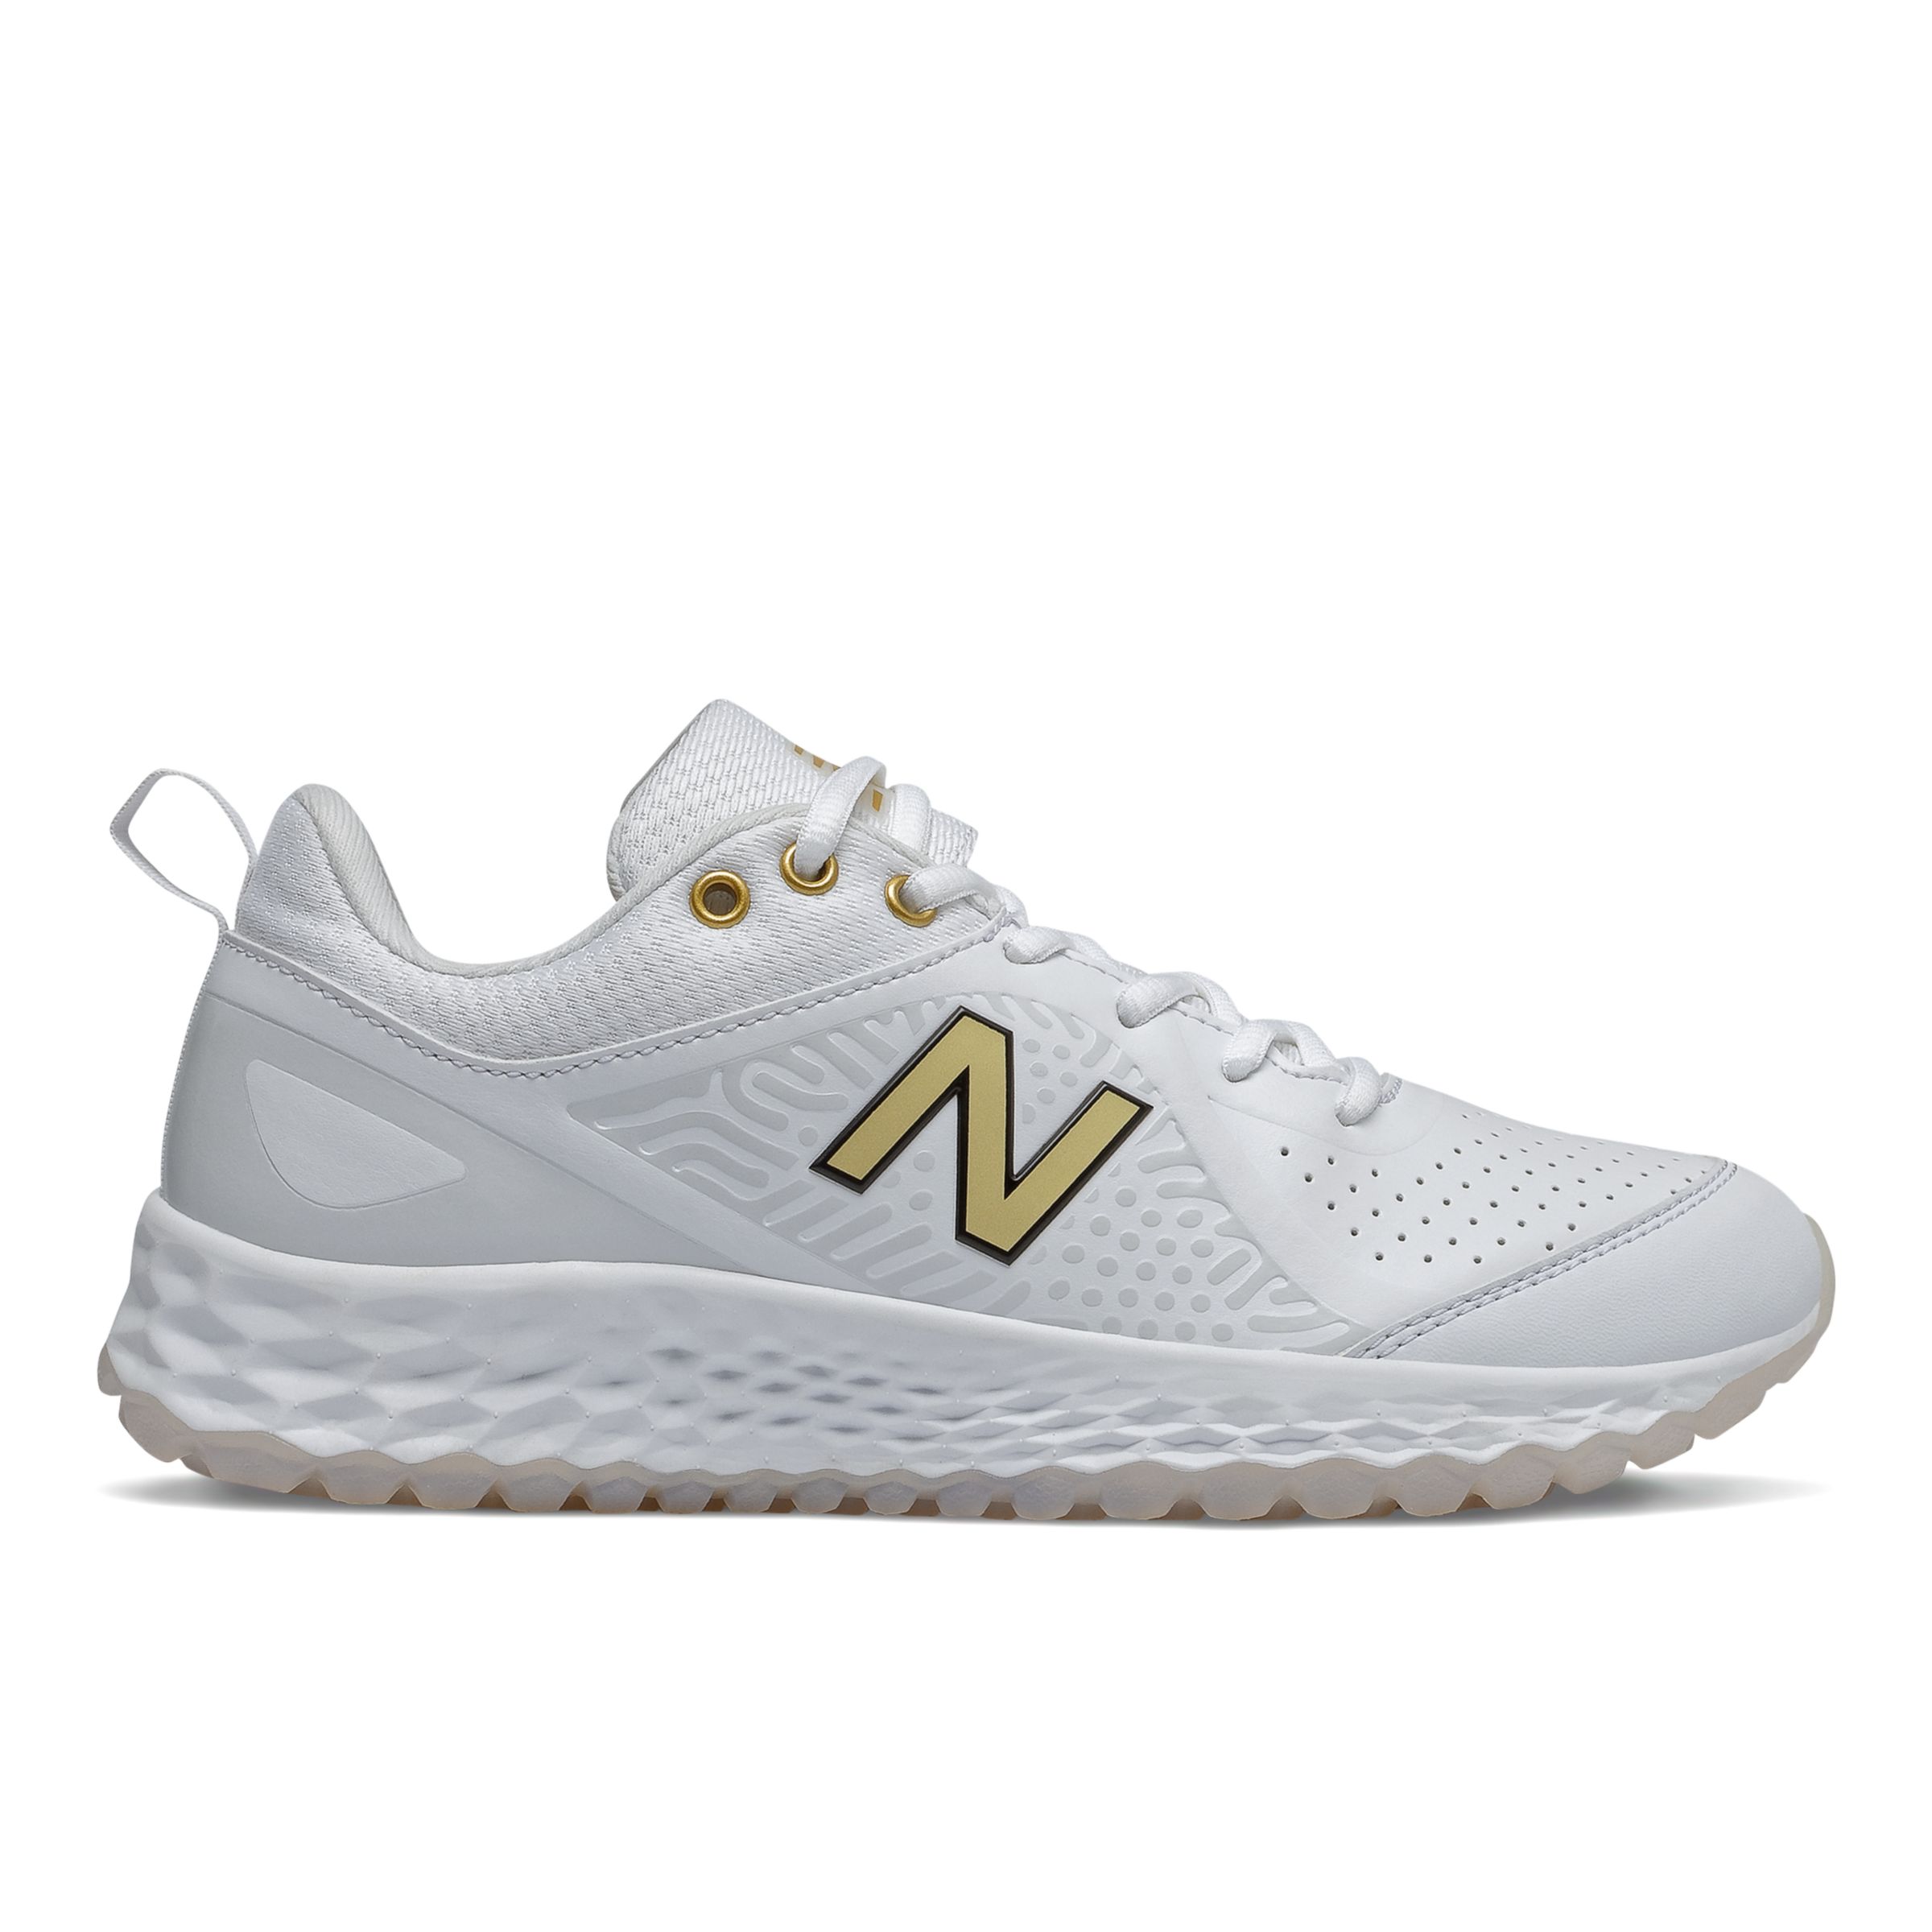 black and white new balance turf shoes